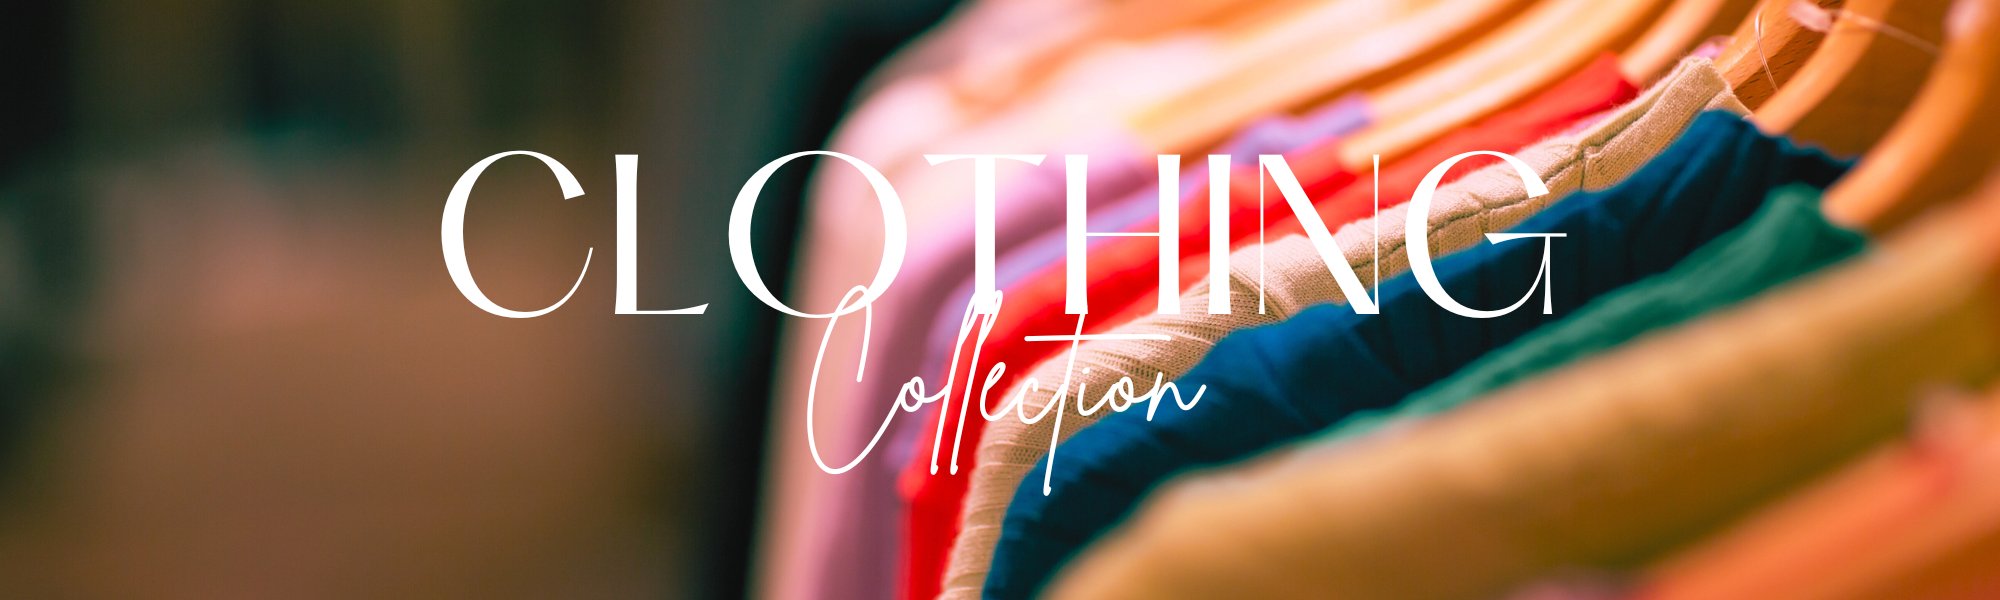 Clothing Collection - Marianne Jones